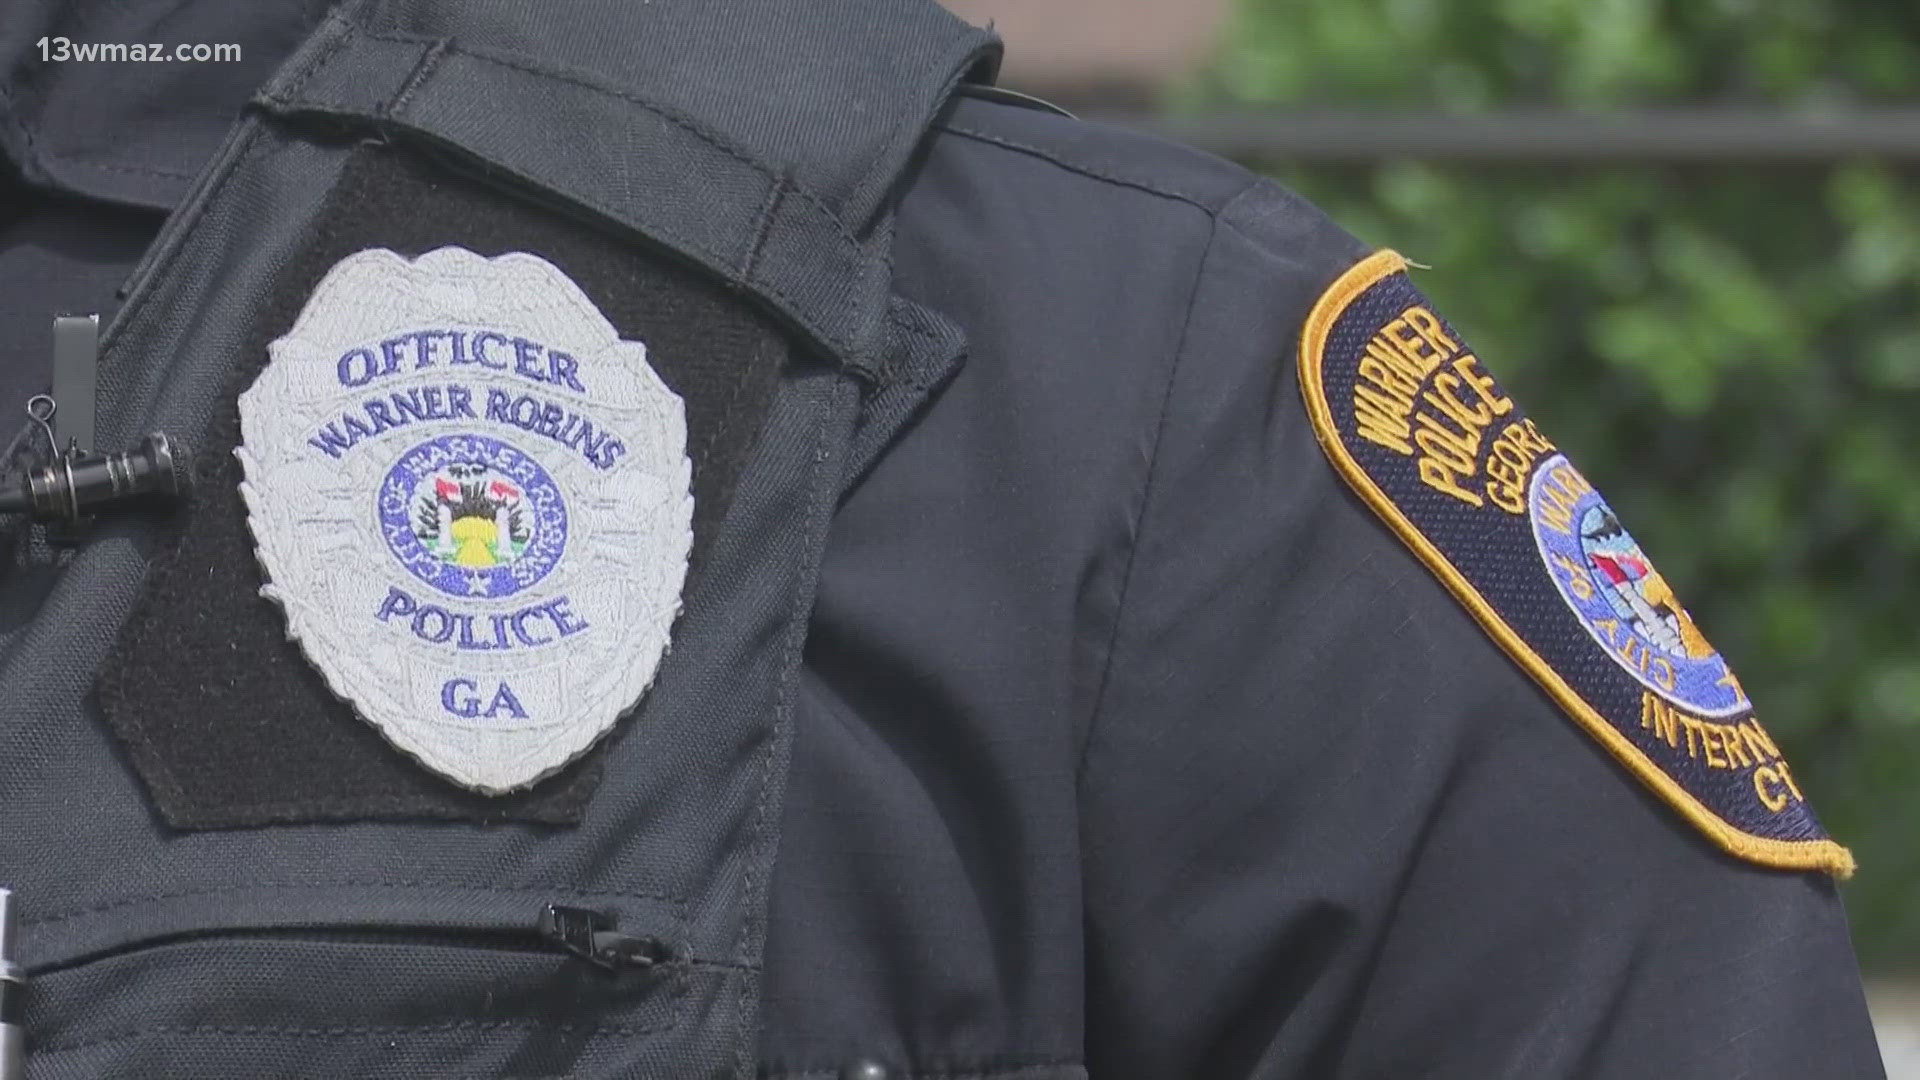 The department is looking to hire 21 patrol officers.